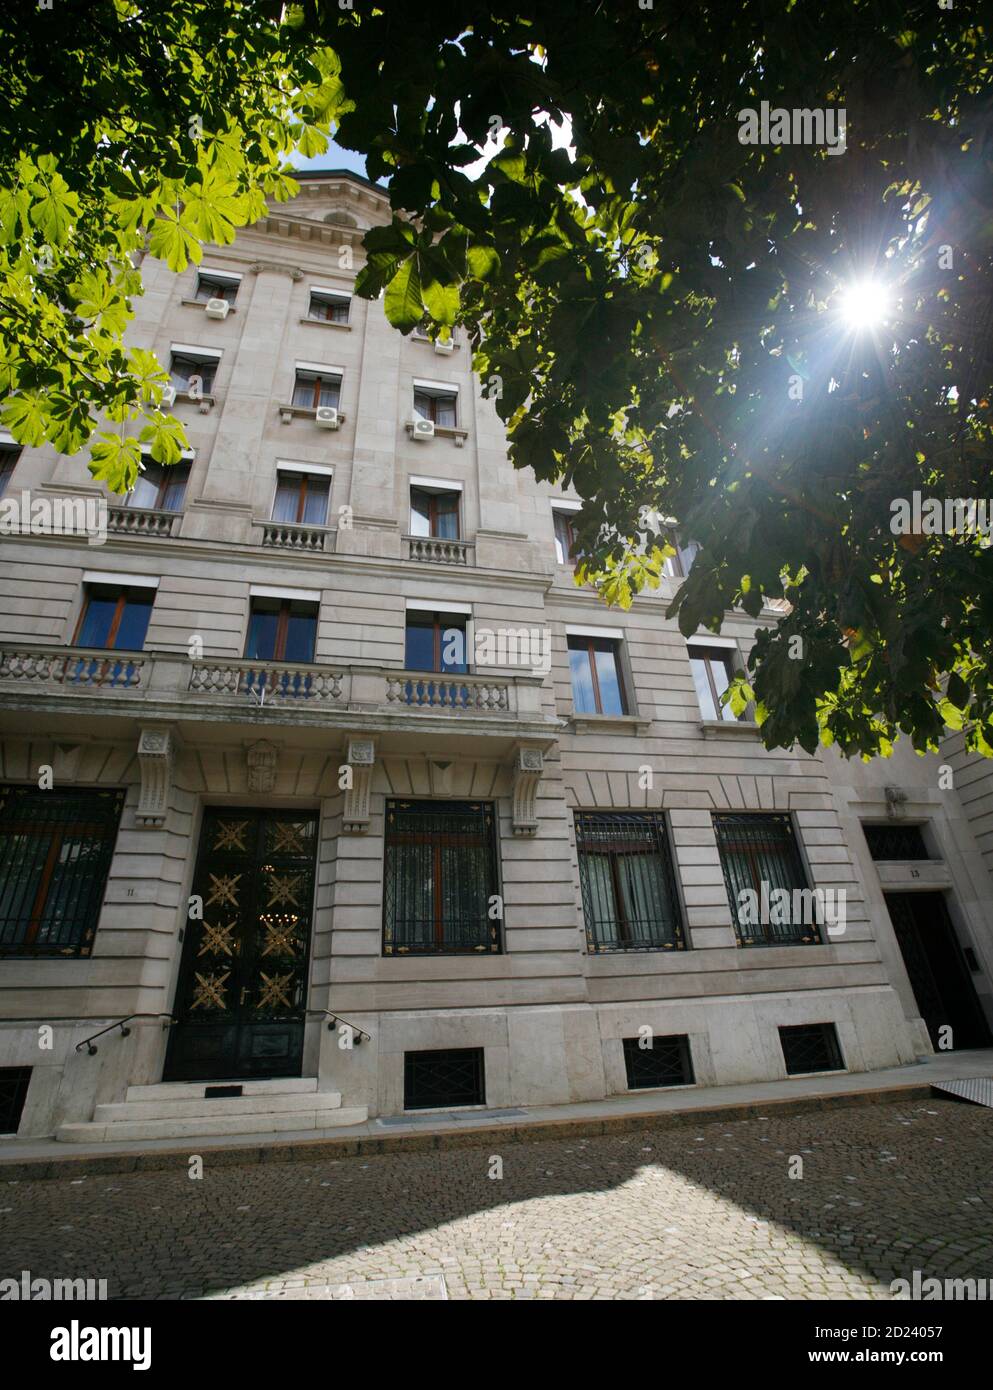 The building of the Lombard, Odier, Darier, Hentsch & Cie bank (LODH) is pictured in Geneva August 8, 2008.   REUTERS/Denis Balibouse   (SWITZERLAND) Stock Photo